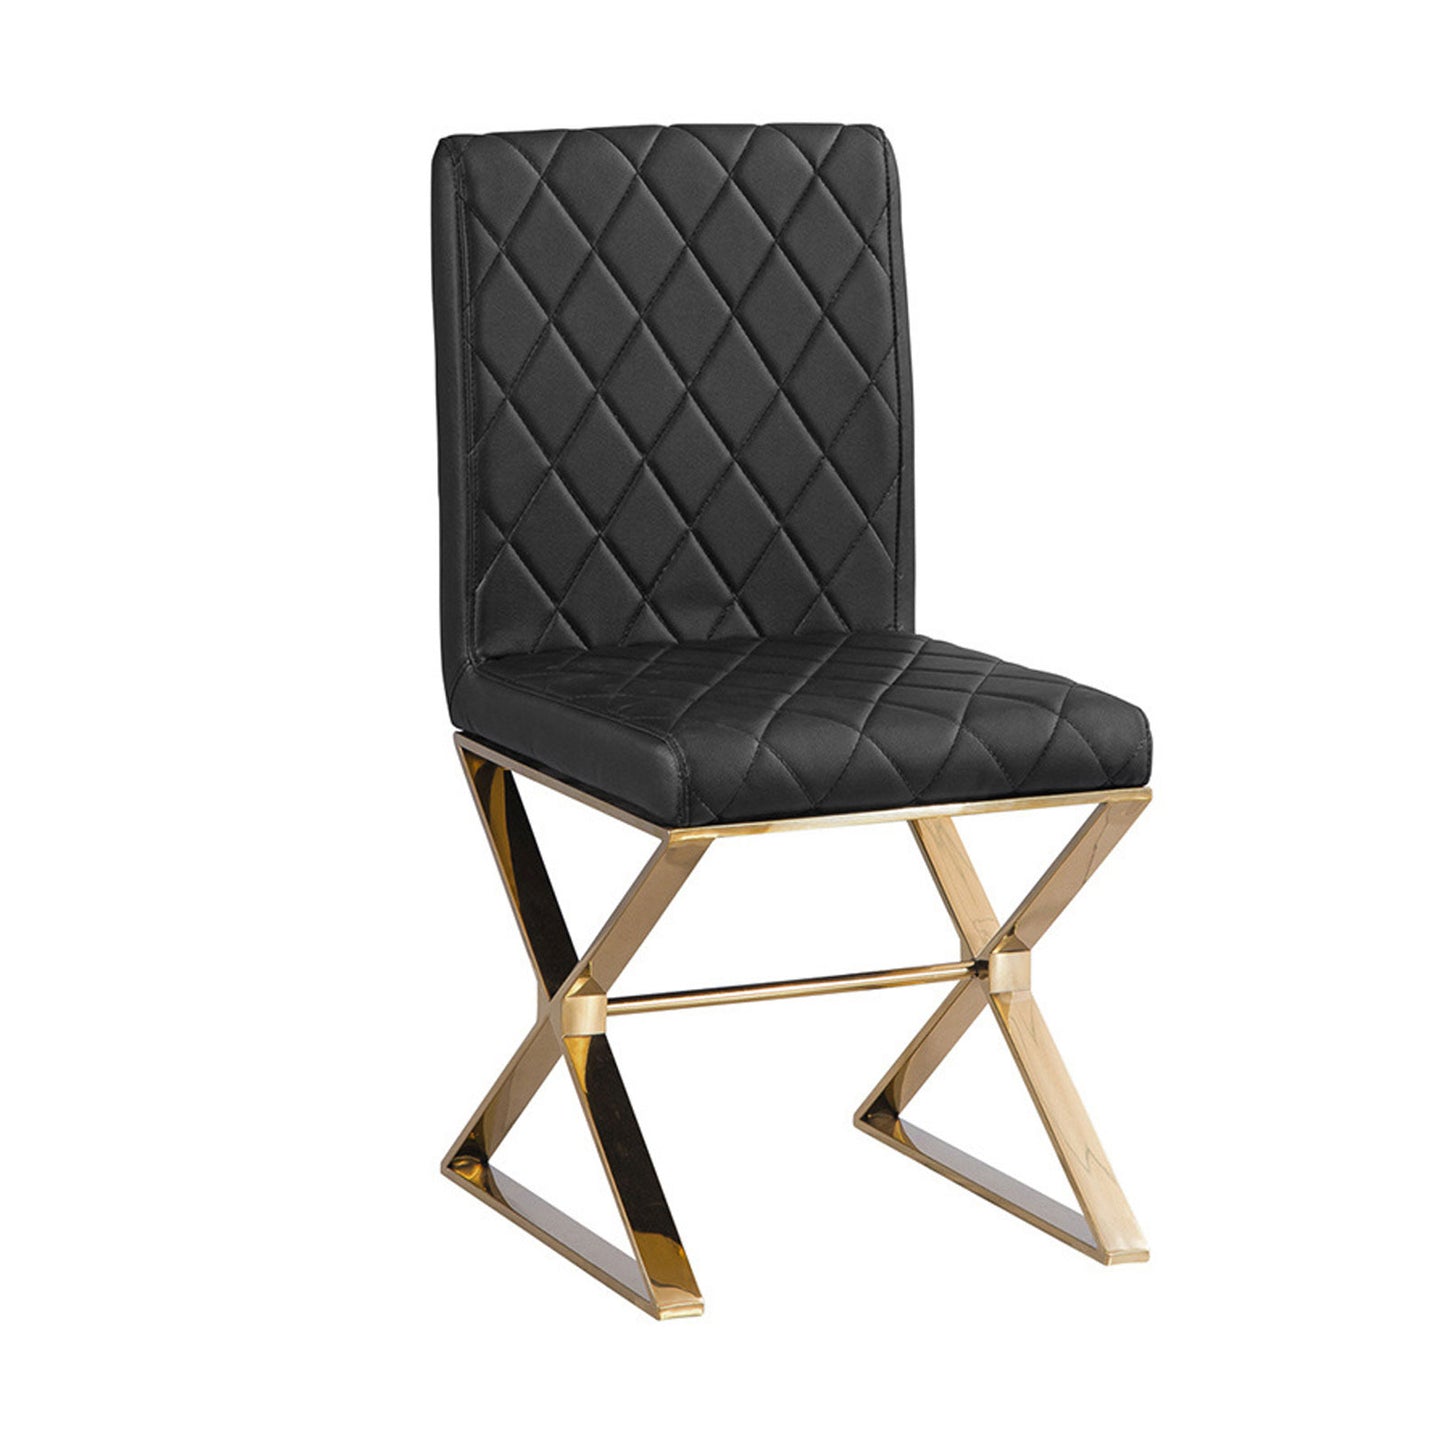 2X Dining Chair Stainless Gold Frame & Seat Black PU Leather - image2